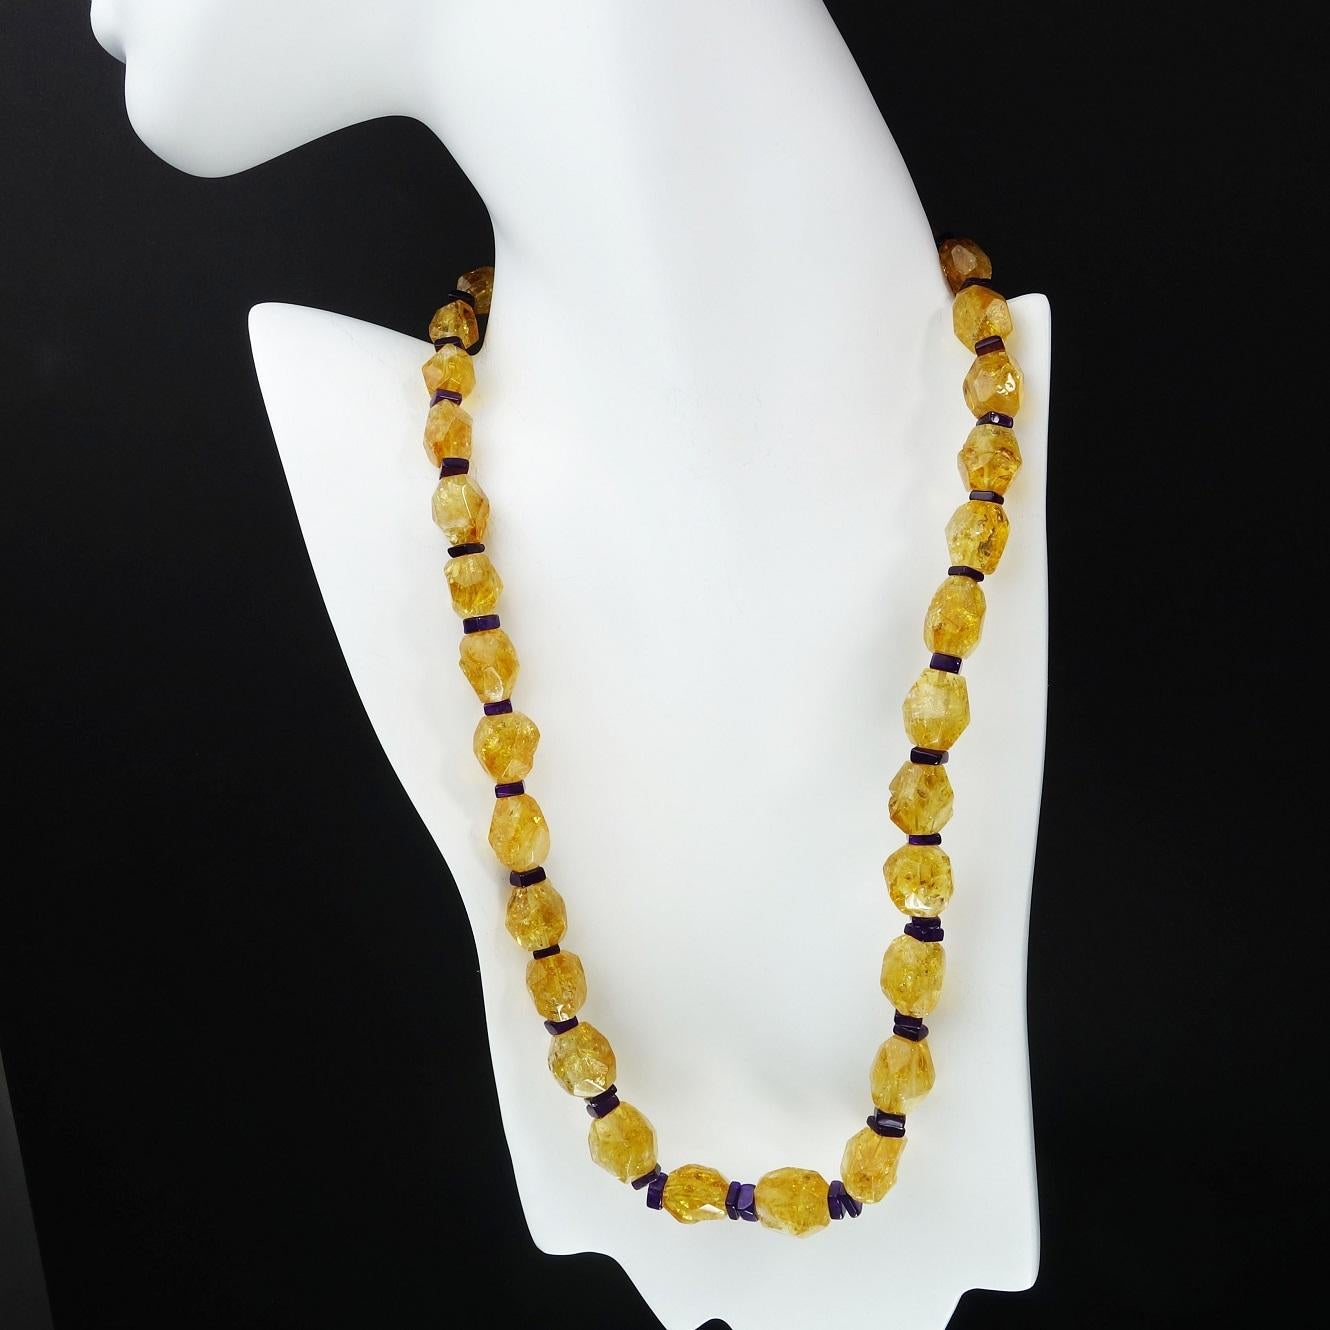 Bead AJD Graduated, Faceted Sparkling Citrine with Amethyst Accents Necklace